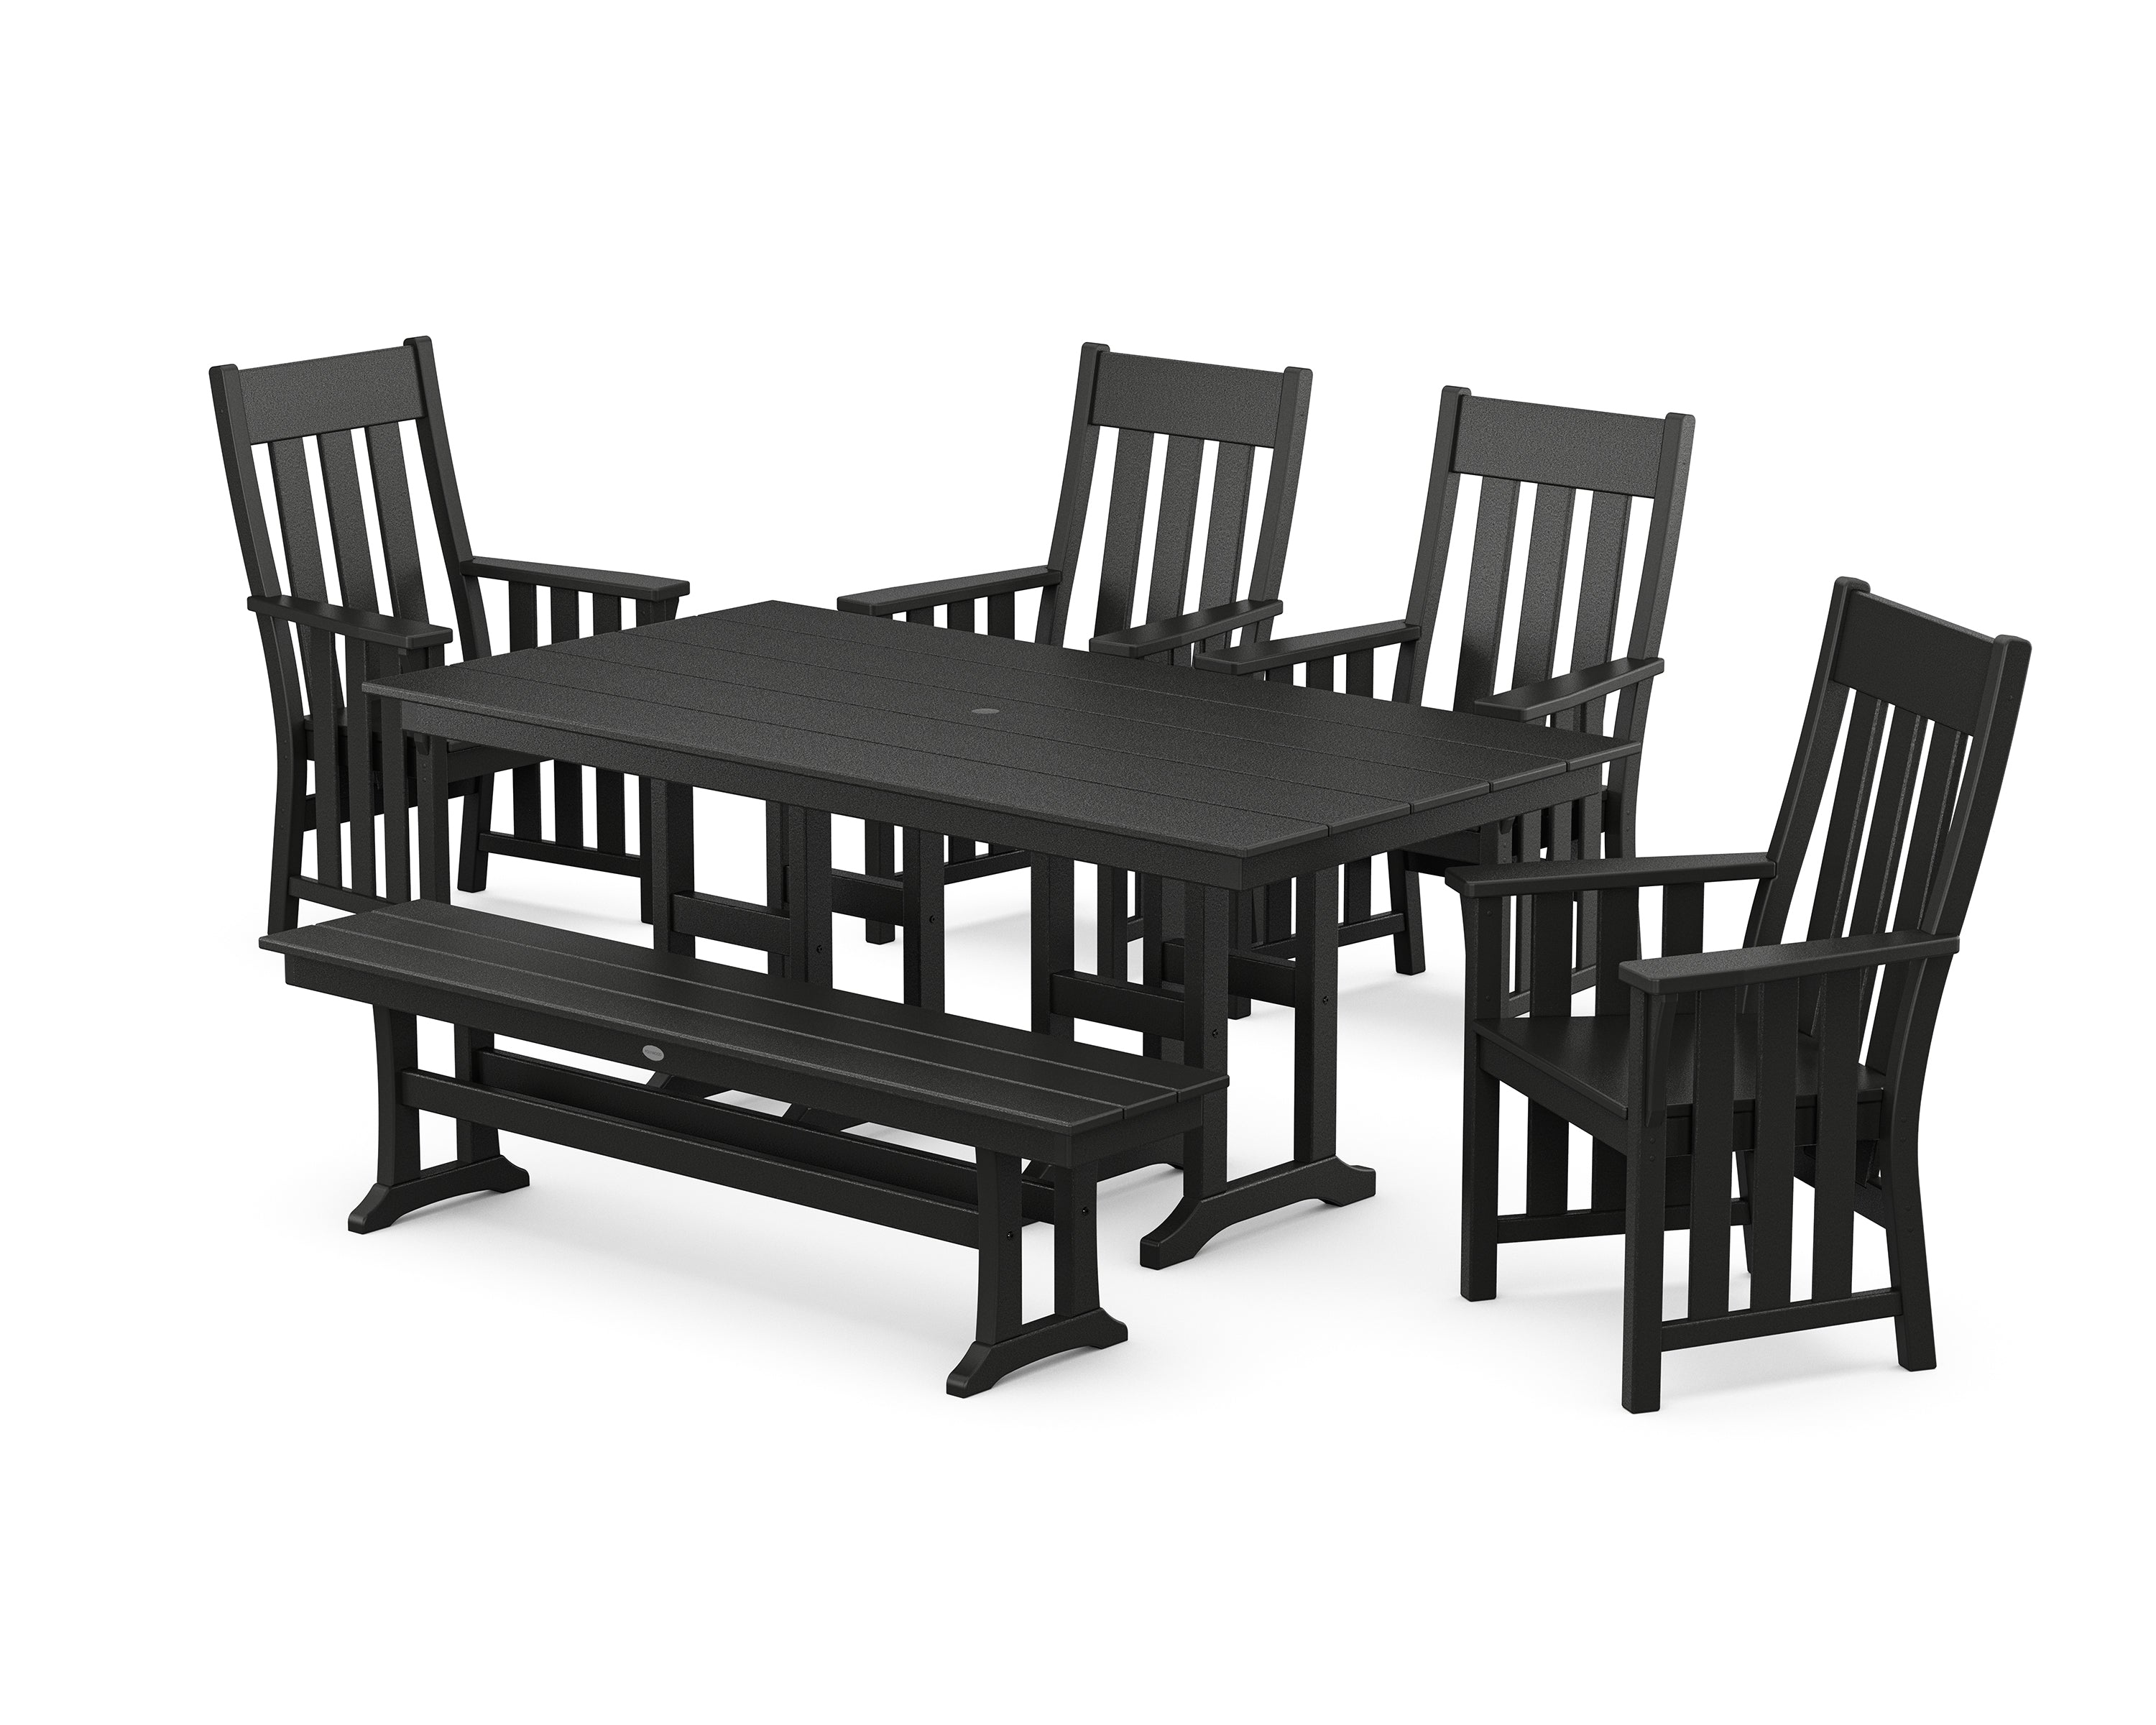 Martha Stewart by POLYWOOD® Acadia 6-Piece Farmhouse Dining Set with Bench in Black